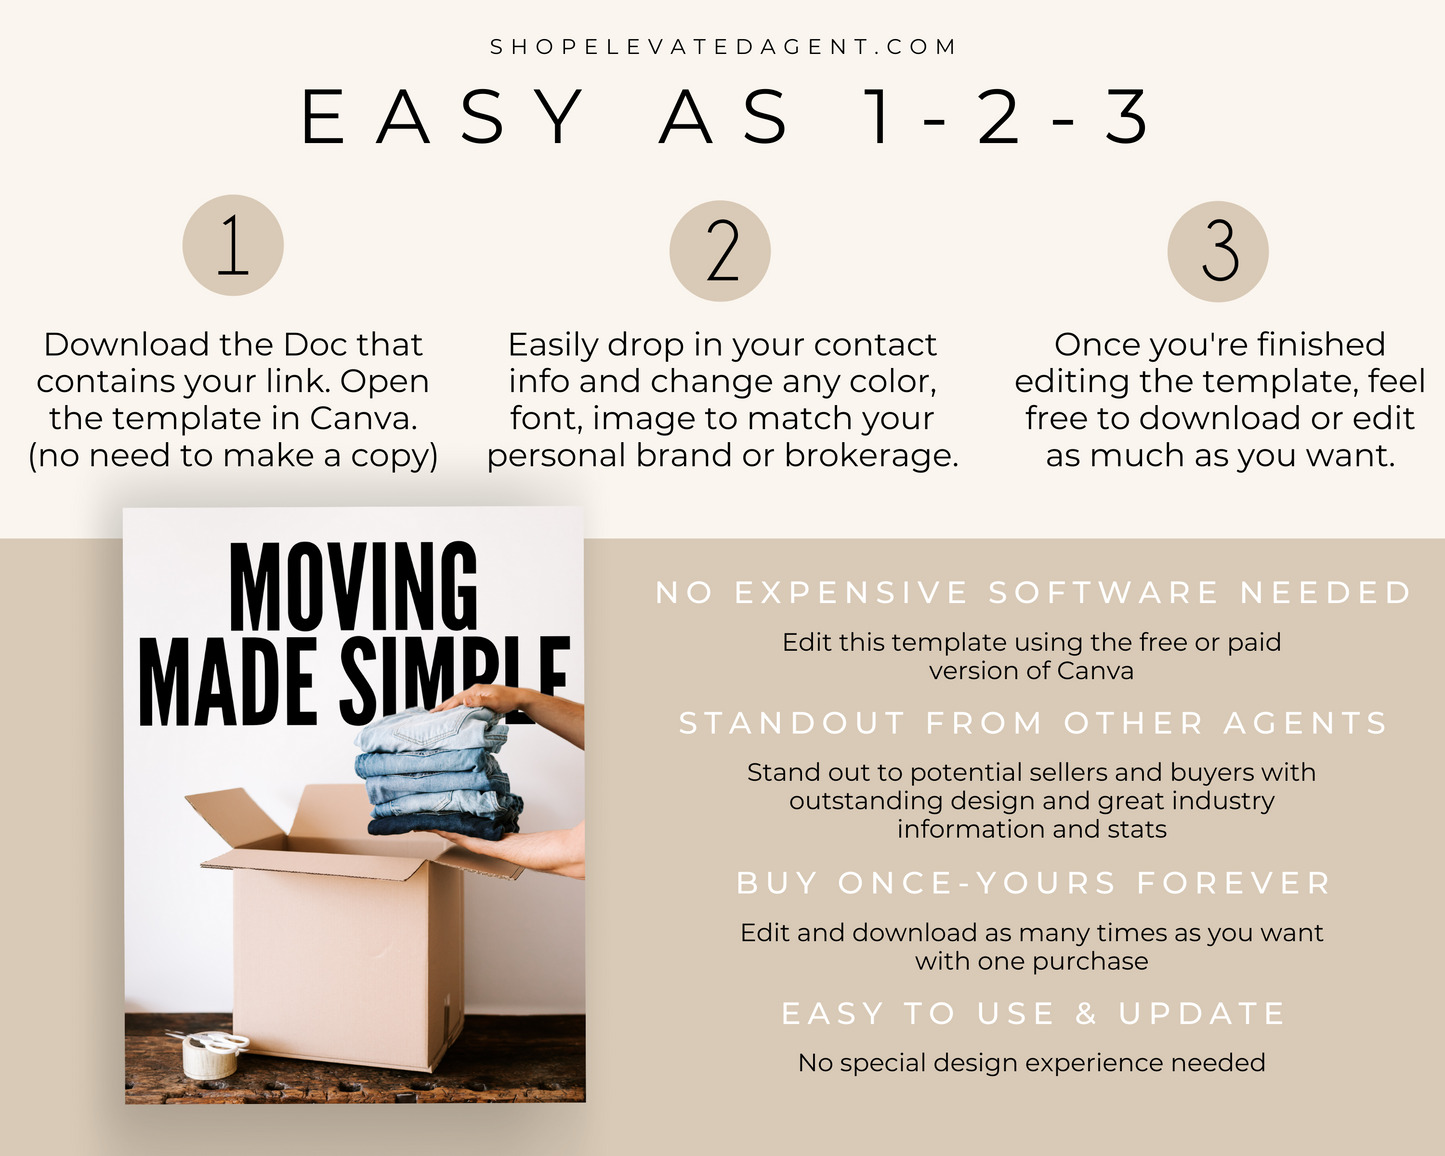 Moving Guide - Minimal Brand Style